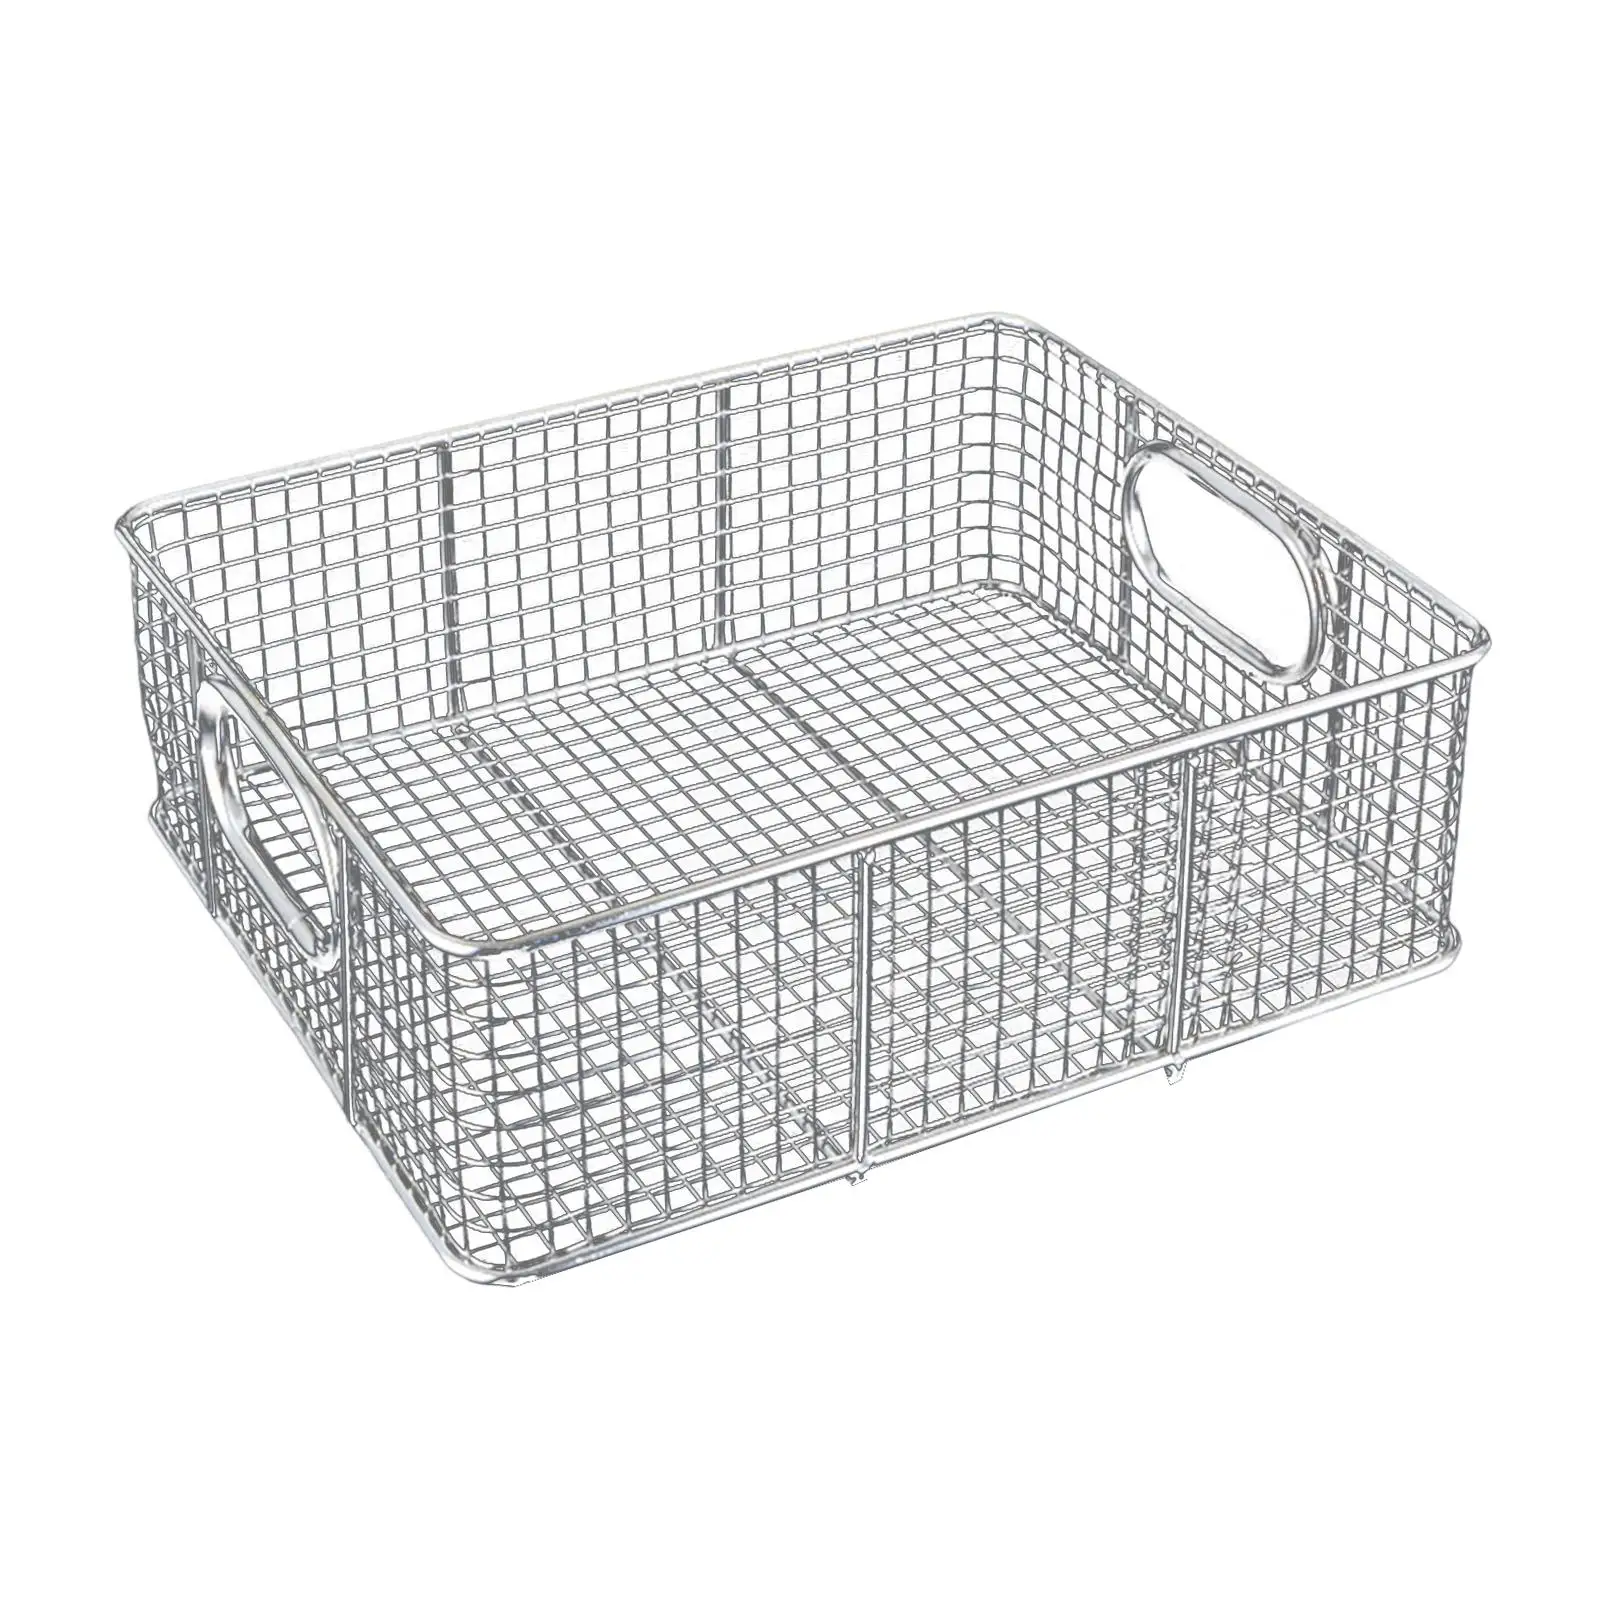 Metal Wire Food Basket Rectangular Food Display Buffet Server Buffet Basket for Restaurant Commercial Use Counter Home Tabletop